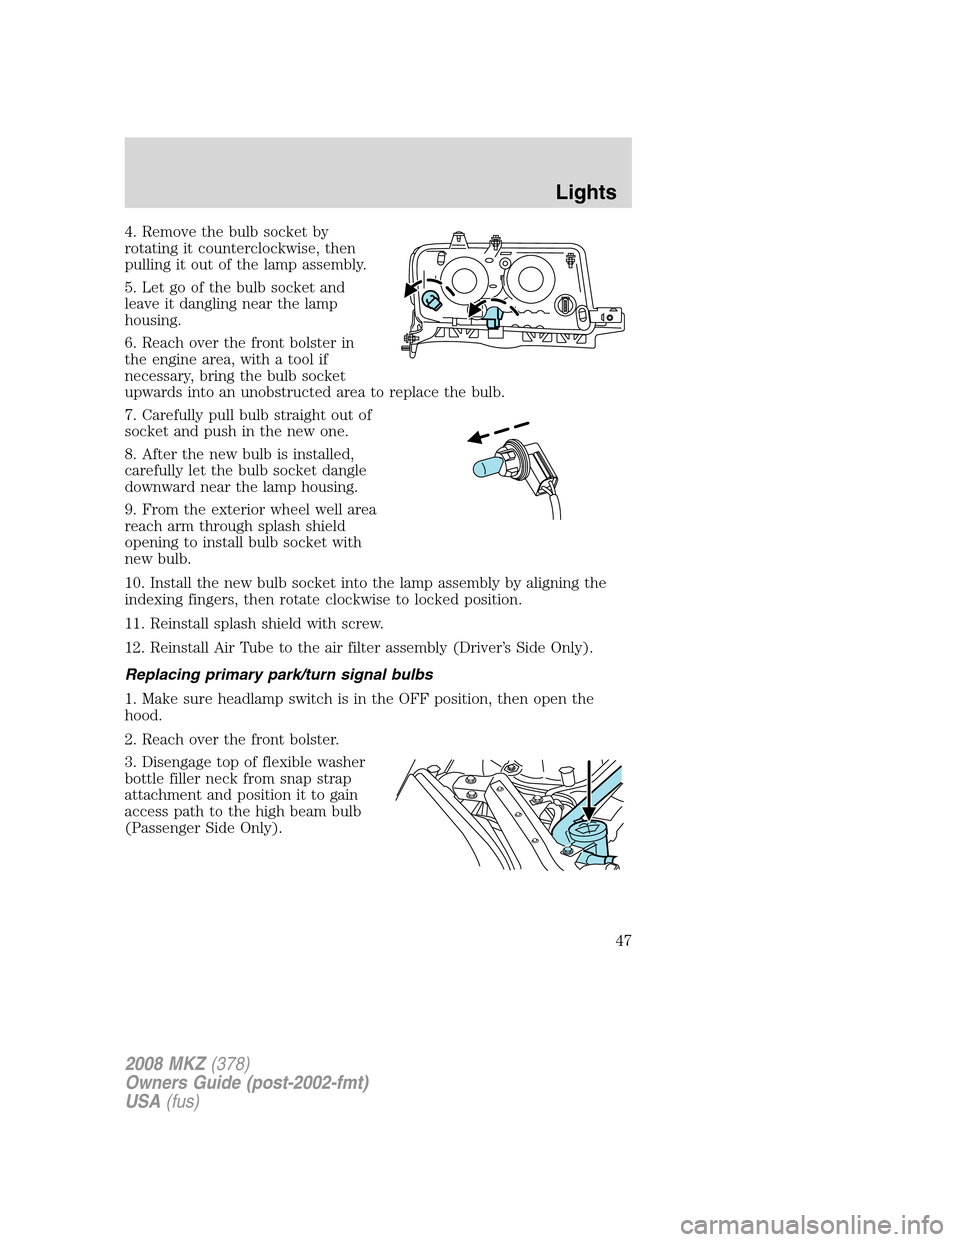 LINCOLN MKZ 2008  Owners Manual 4. Remove the bulb socket by
rotating it counterclockwise, then
pulling it out of the lamp assembly.
5. Let go of the bulb socket and
leave it dangling near the lamp
housing.
6. Reach over the front b